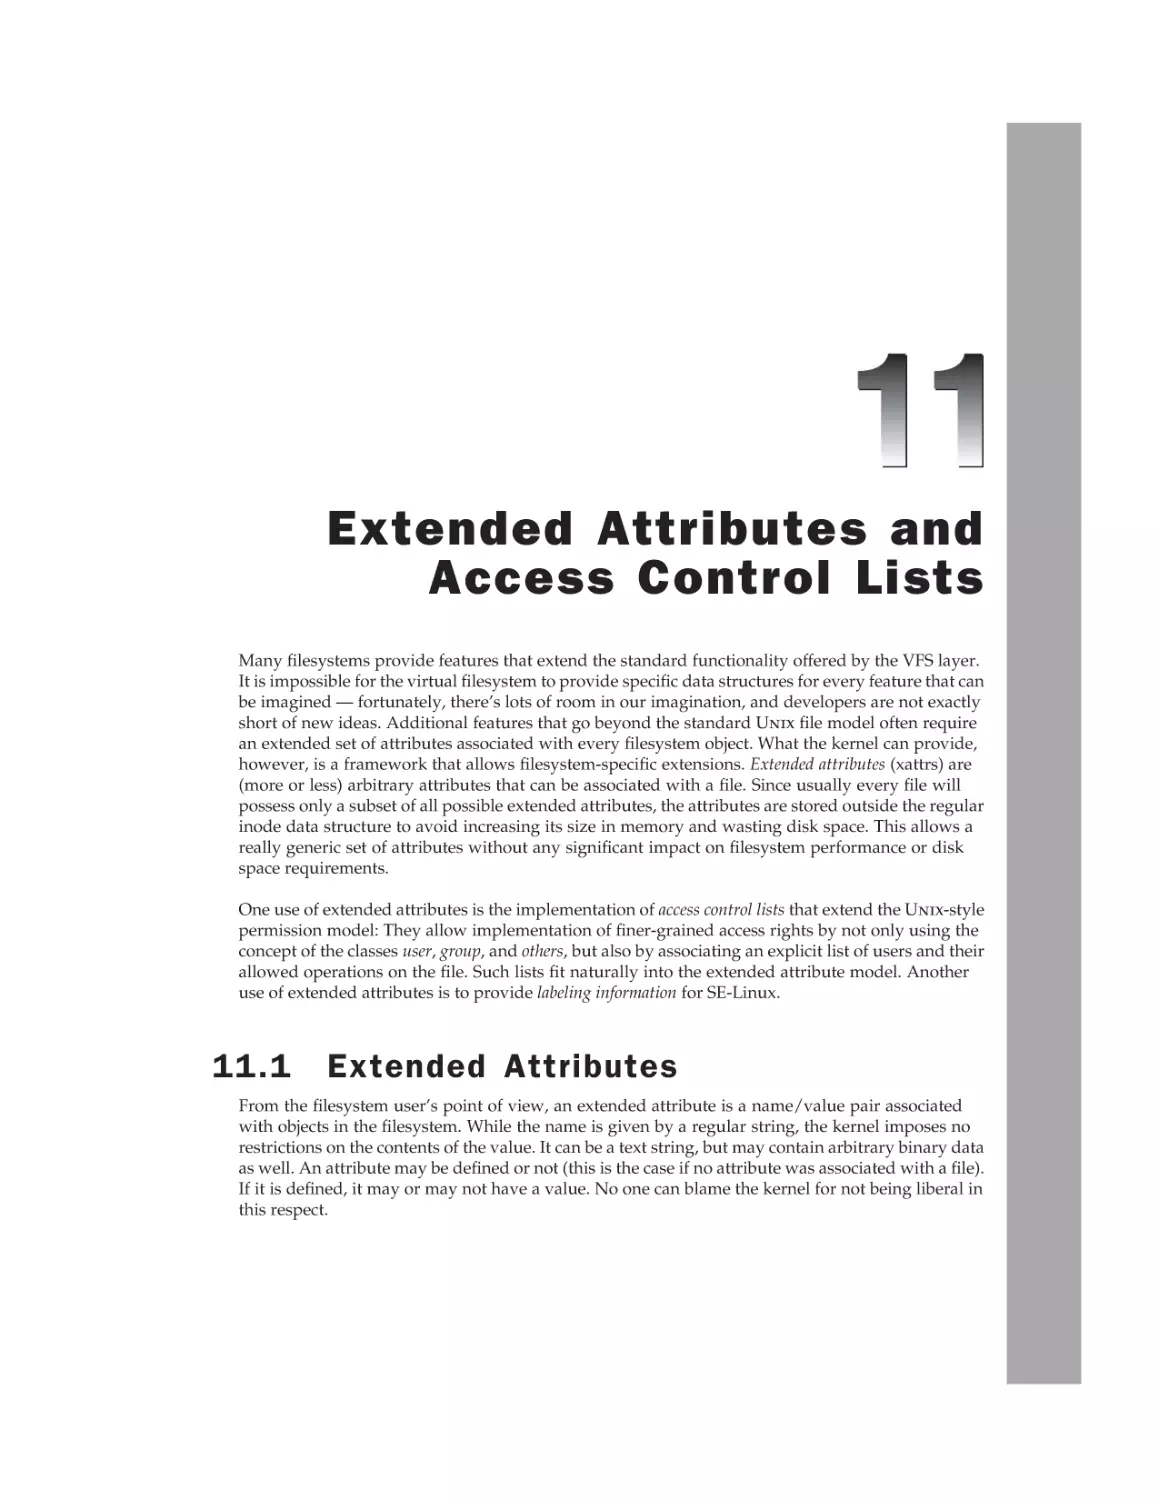 Chapter 11
11.1 Extended Attributes